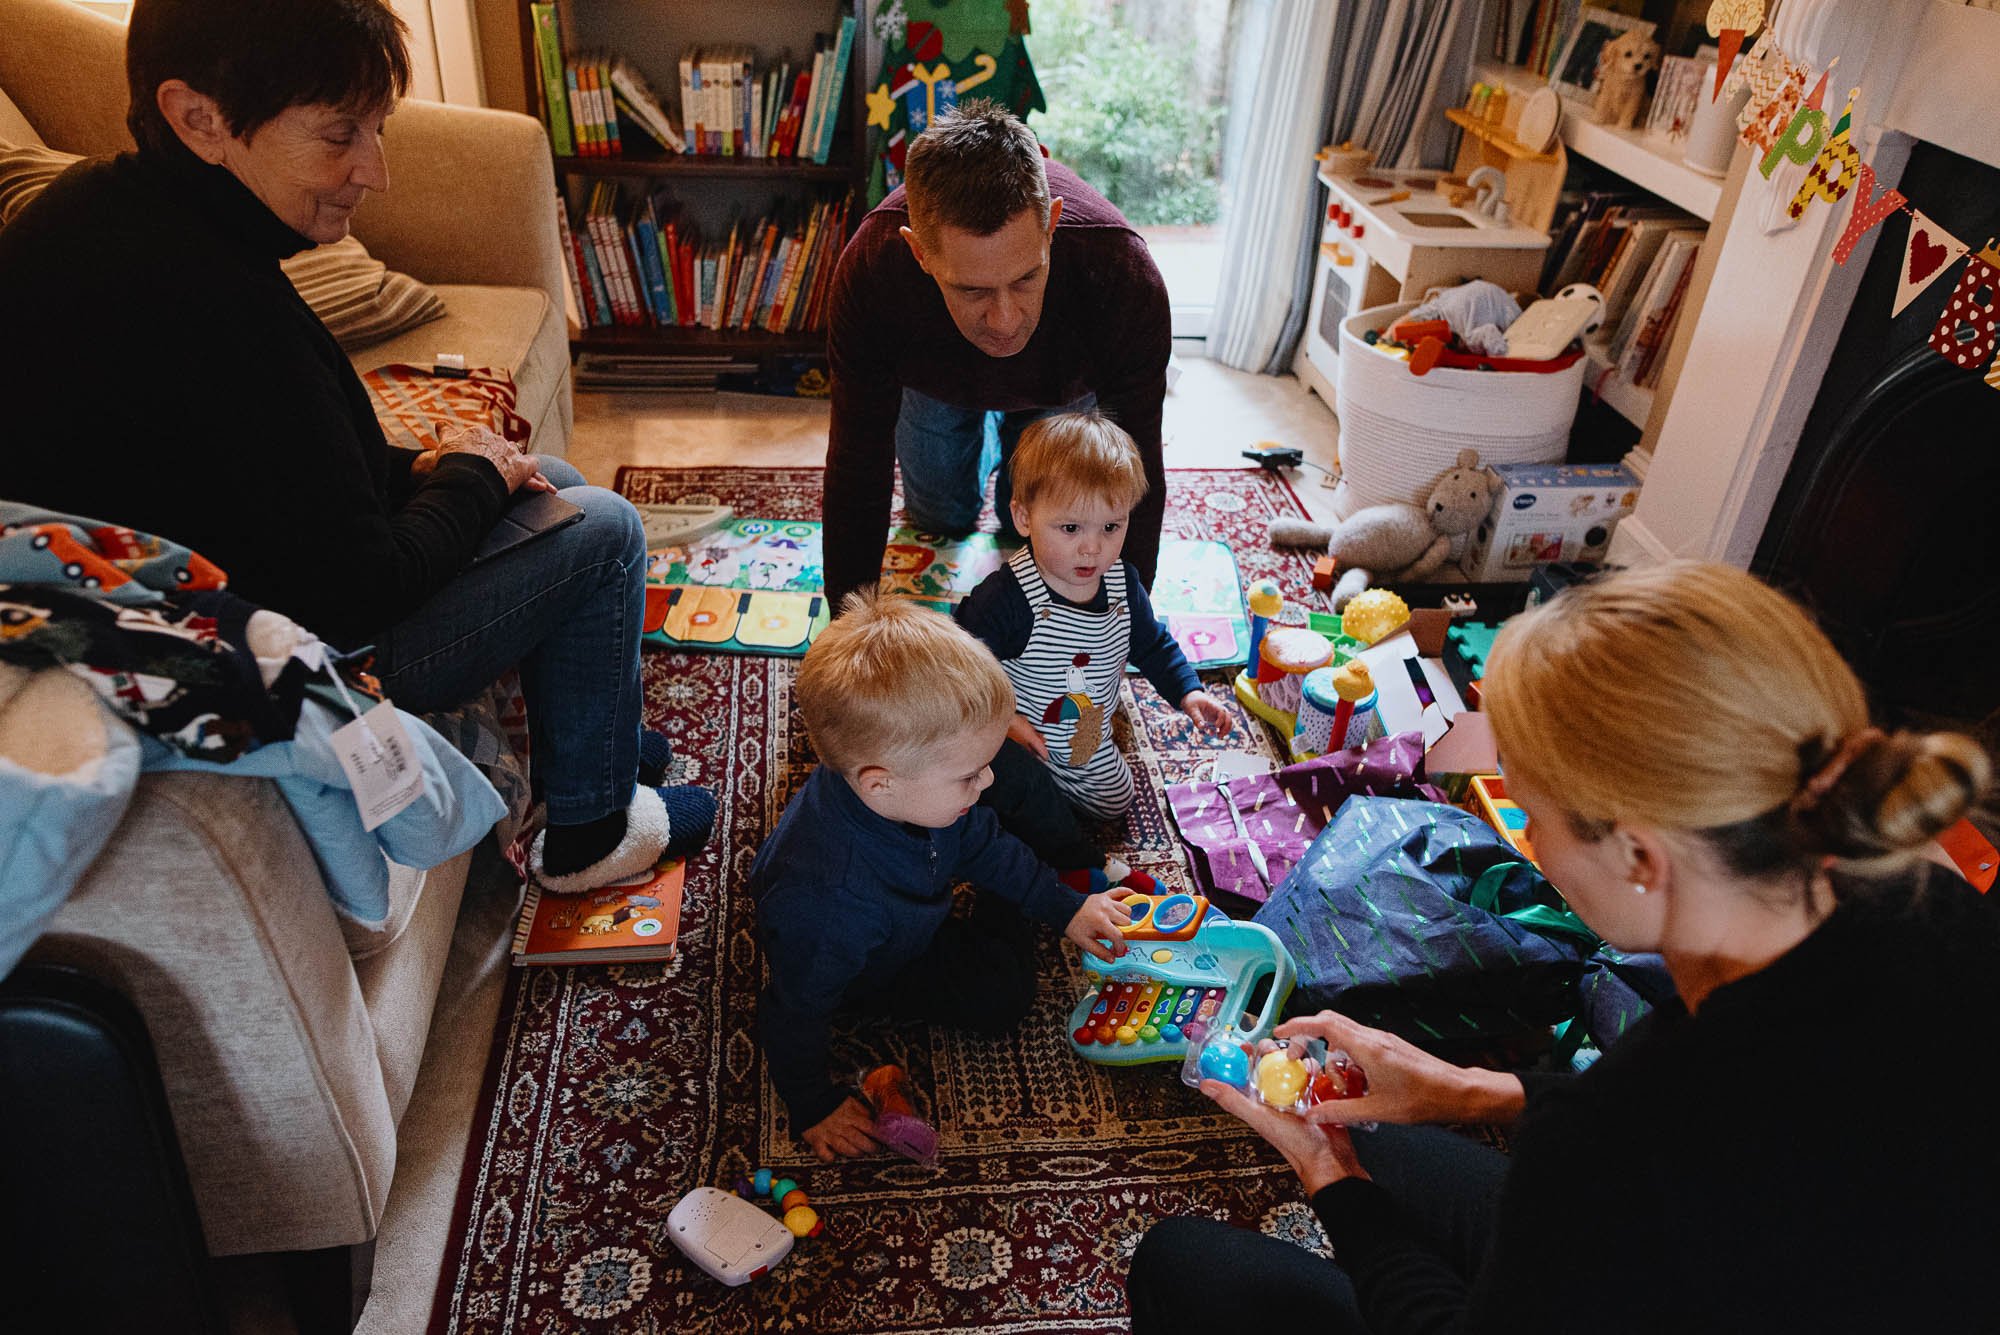 birthday-at-home-family-documentary-photography-unwrapping-presents-dulwich-london-family-photoshoot.jpg